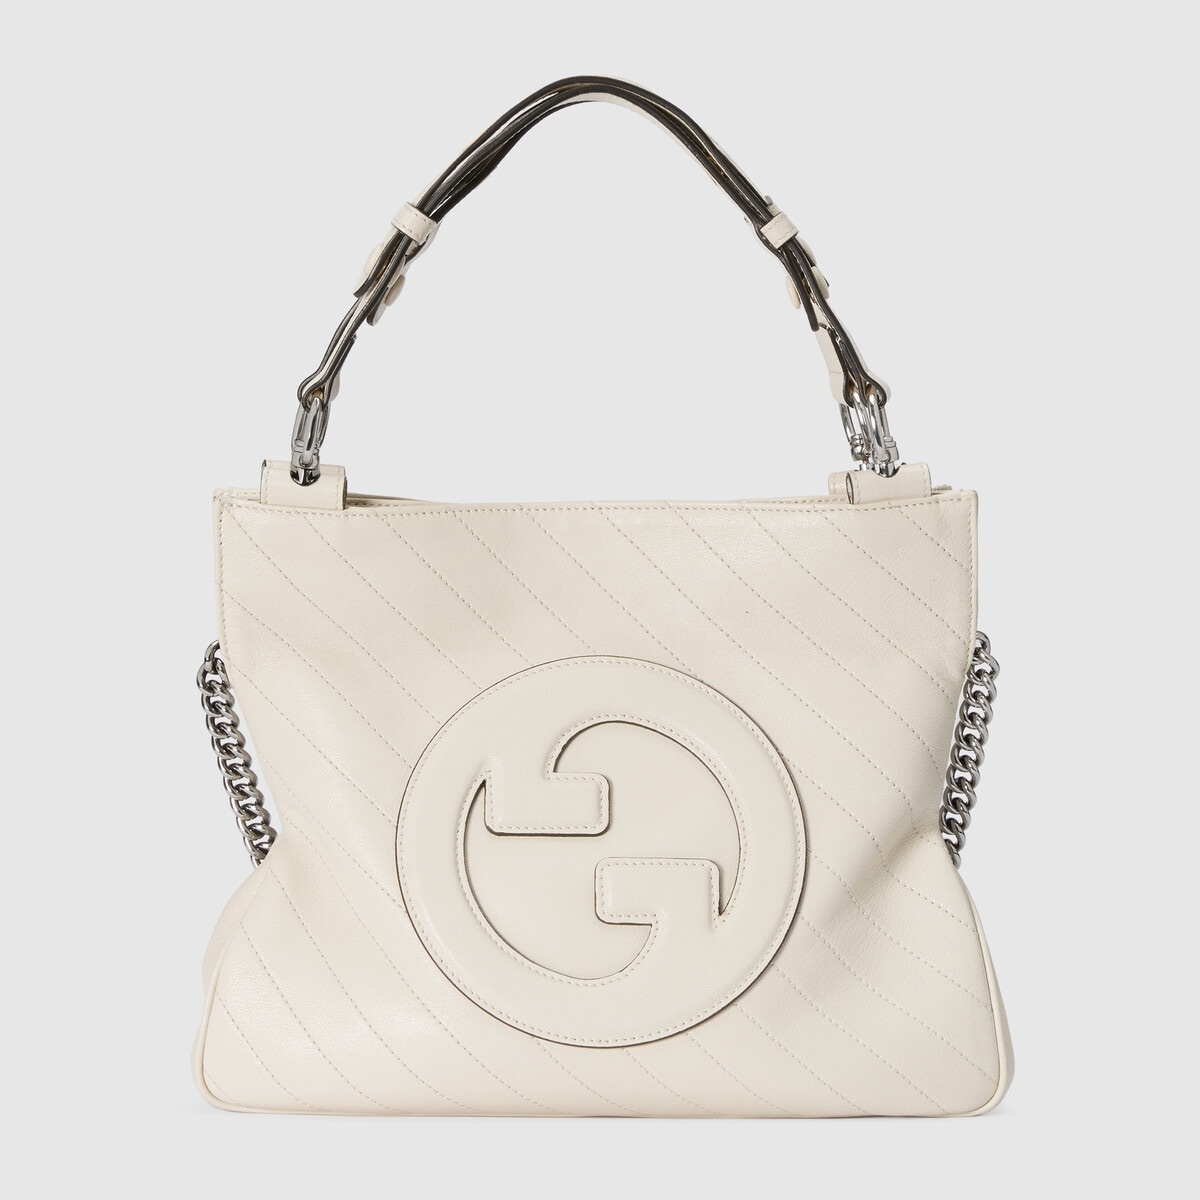 Gucci Blondie small tote bag - 1